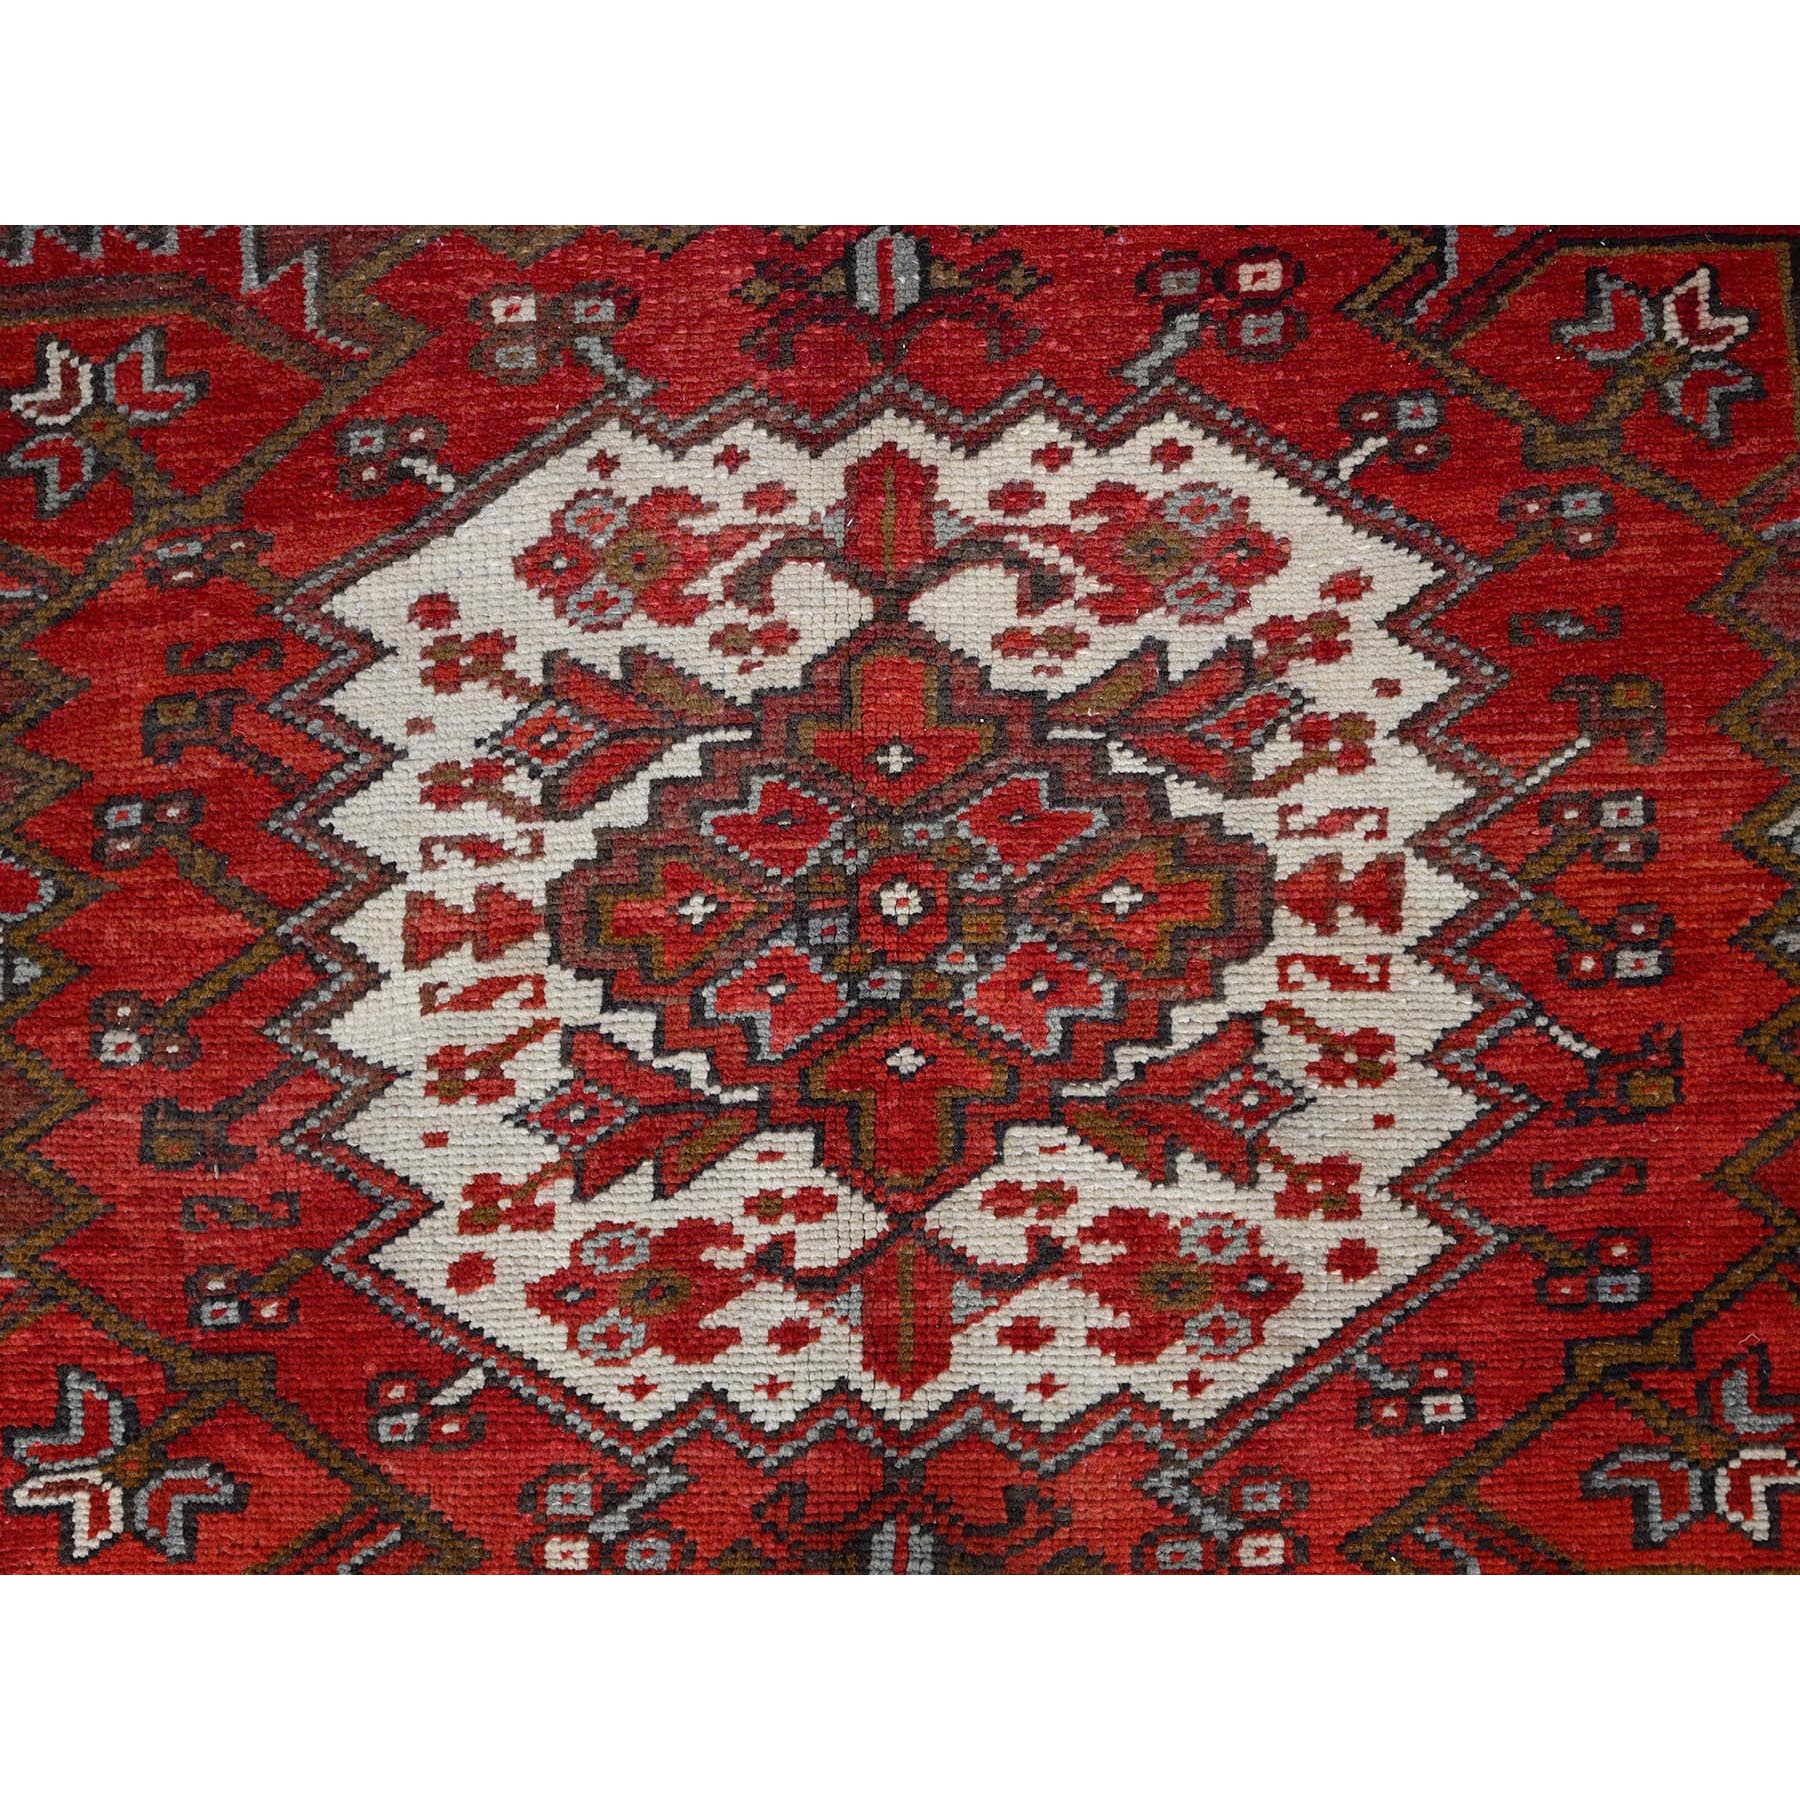 7'5"x10'2" Fire Brick Red, Vintage Persian Heriz with Village Motif, Good Condition, Distressed Look, Pure Wool, Hand Woven, Oriental Rug 